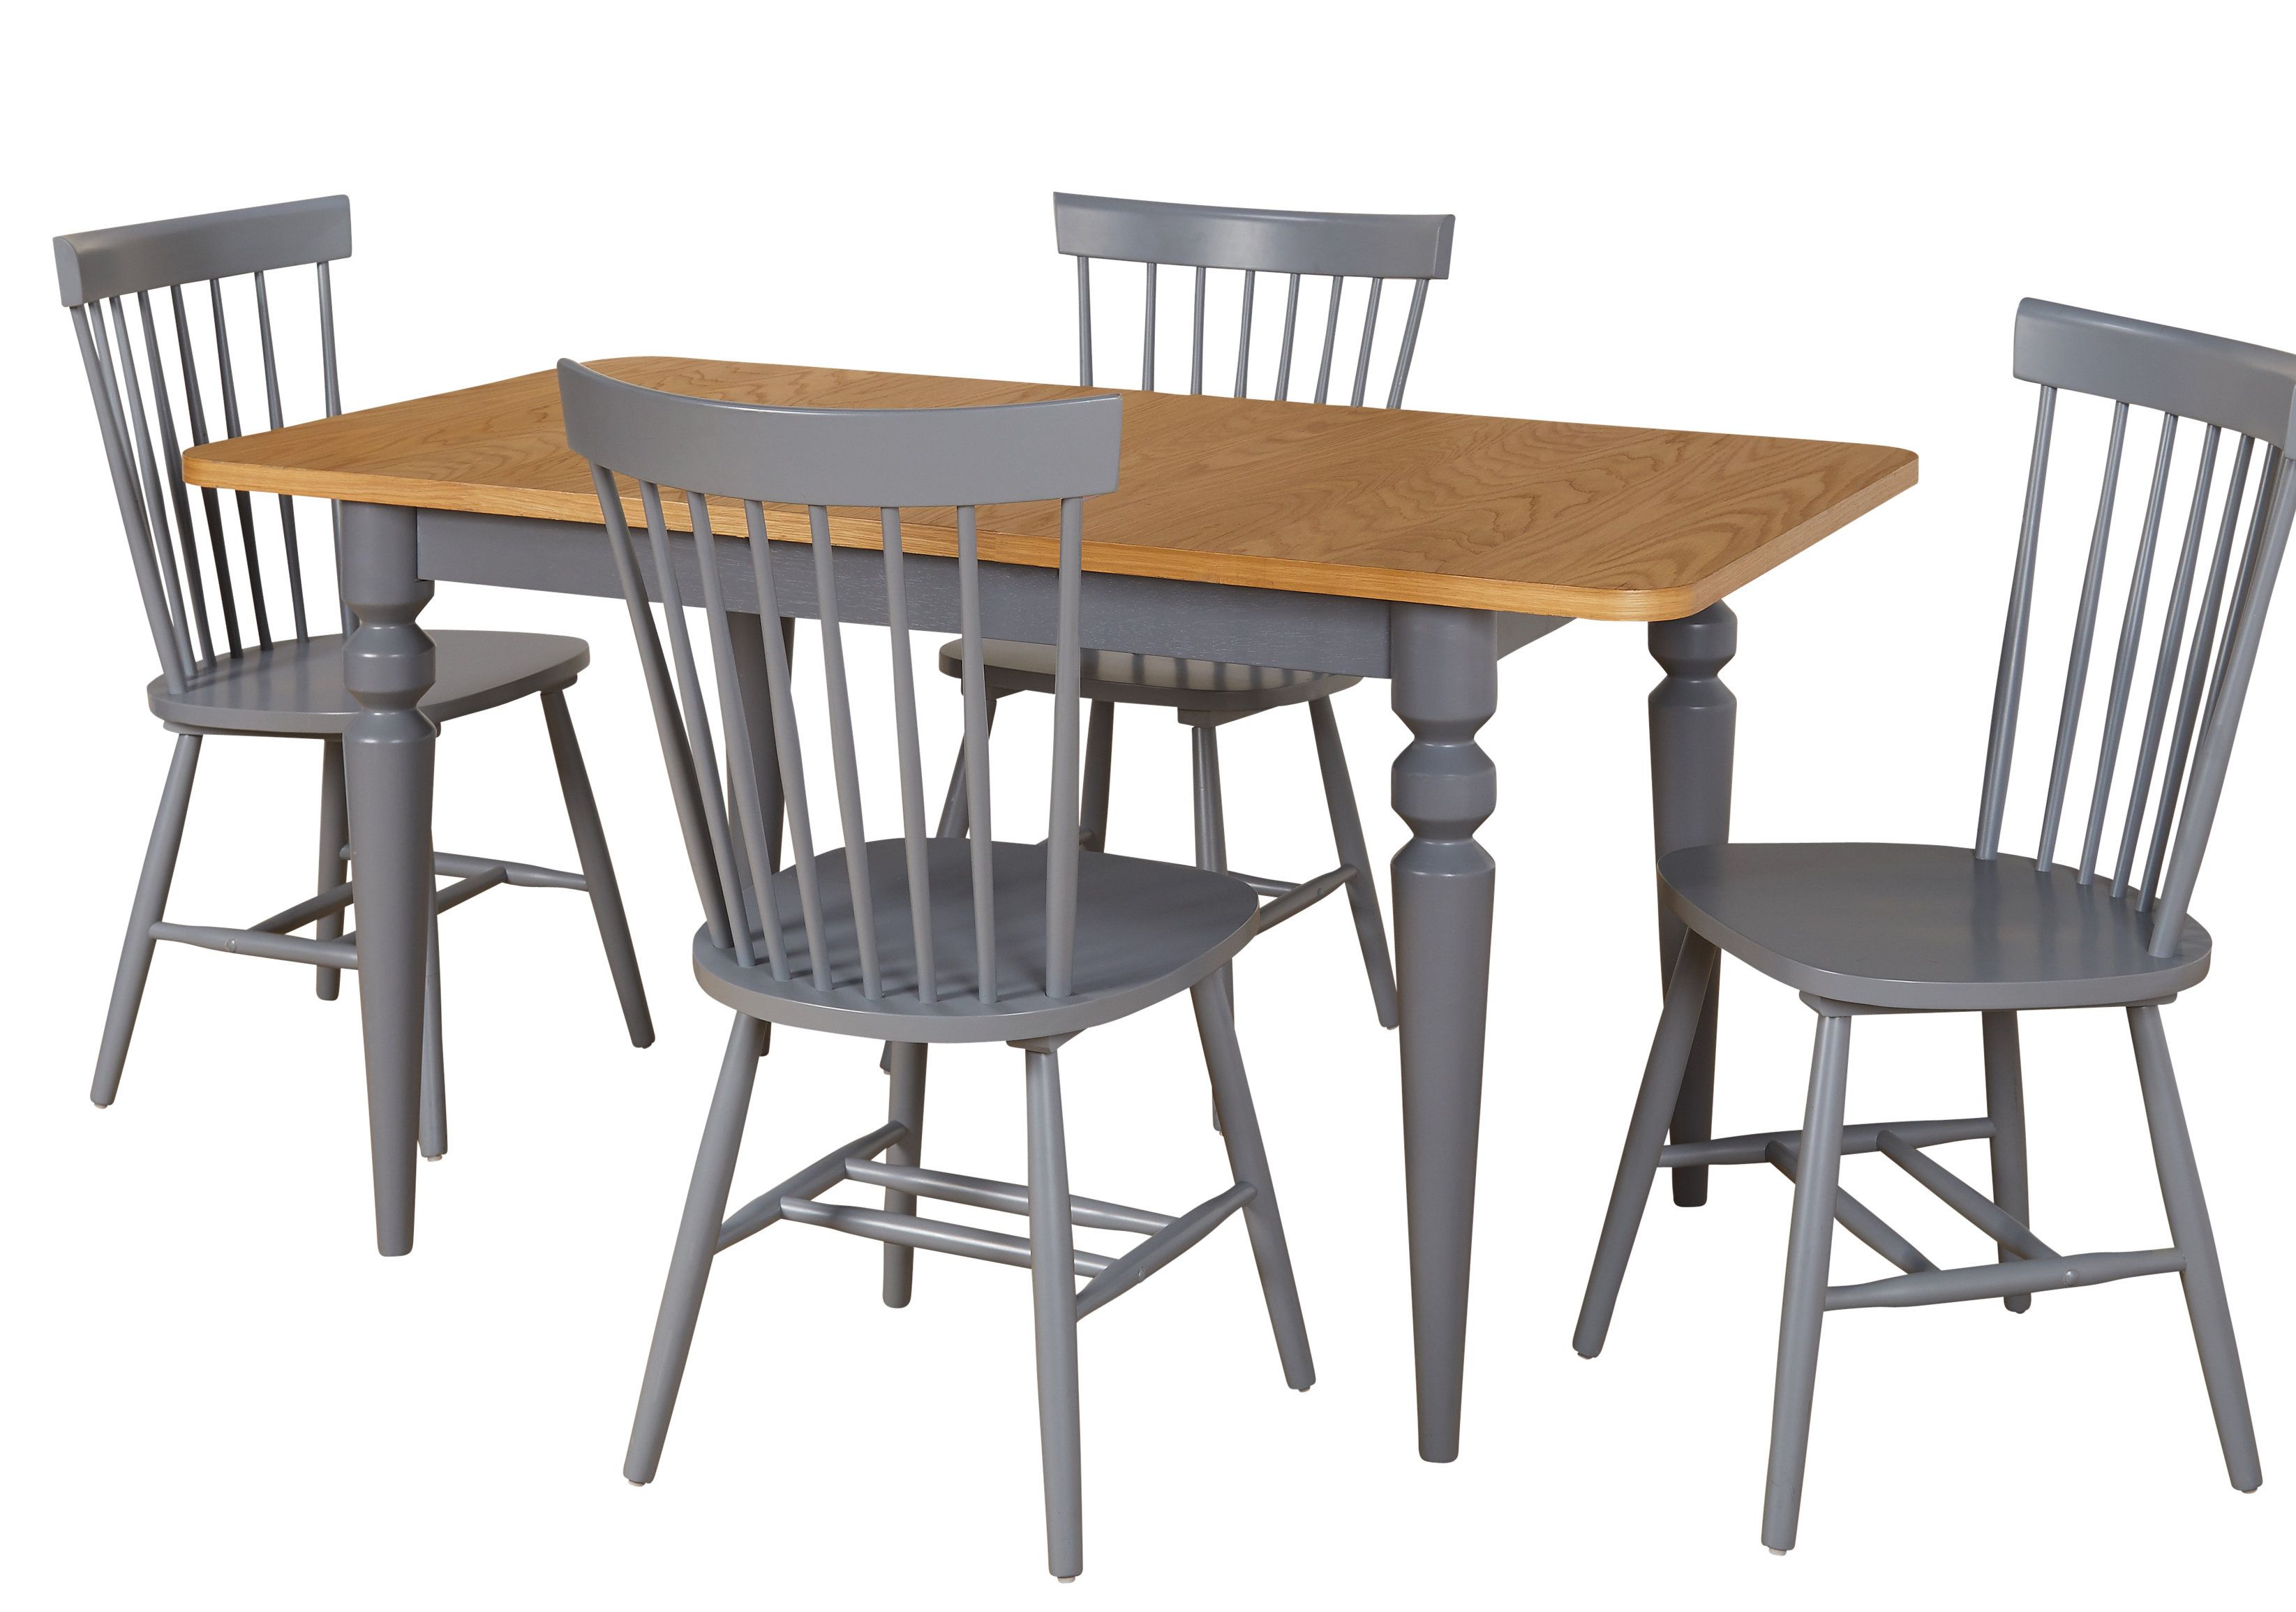 Wayfair Intended For Widely Used Ligon 3 Piece Breakfast Nook Dining Sets (Photo 8 of 20)